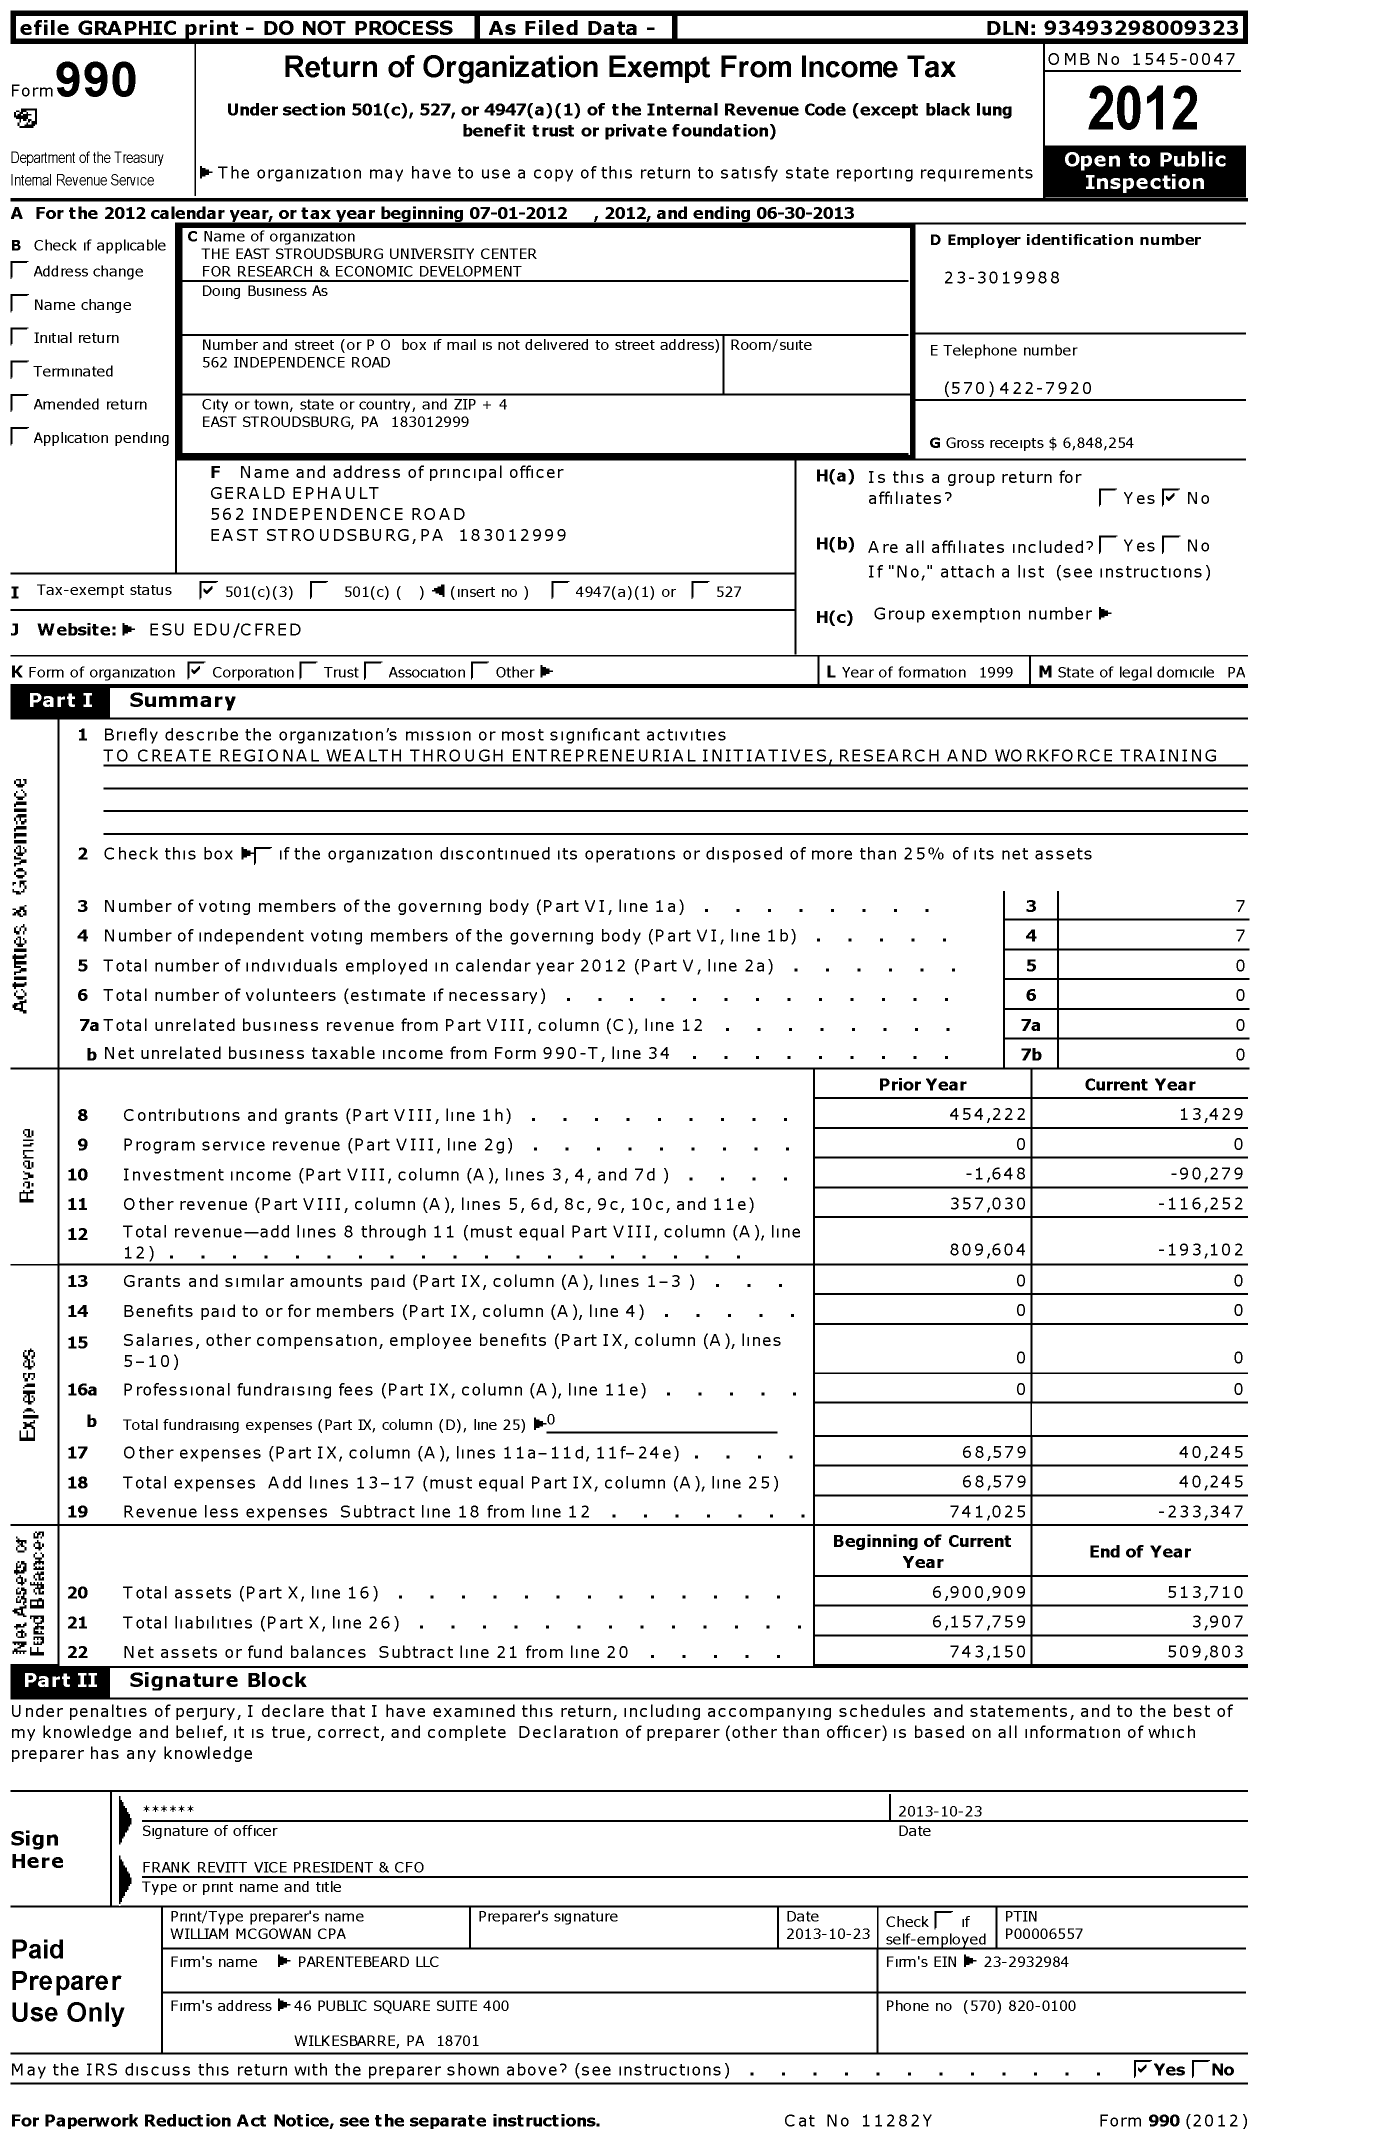 Image of first page of 2012 Form 990 for East Stroudsburg University Center for Research and Economic DVLPMNT